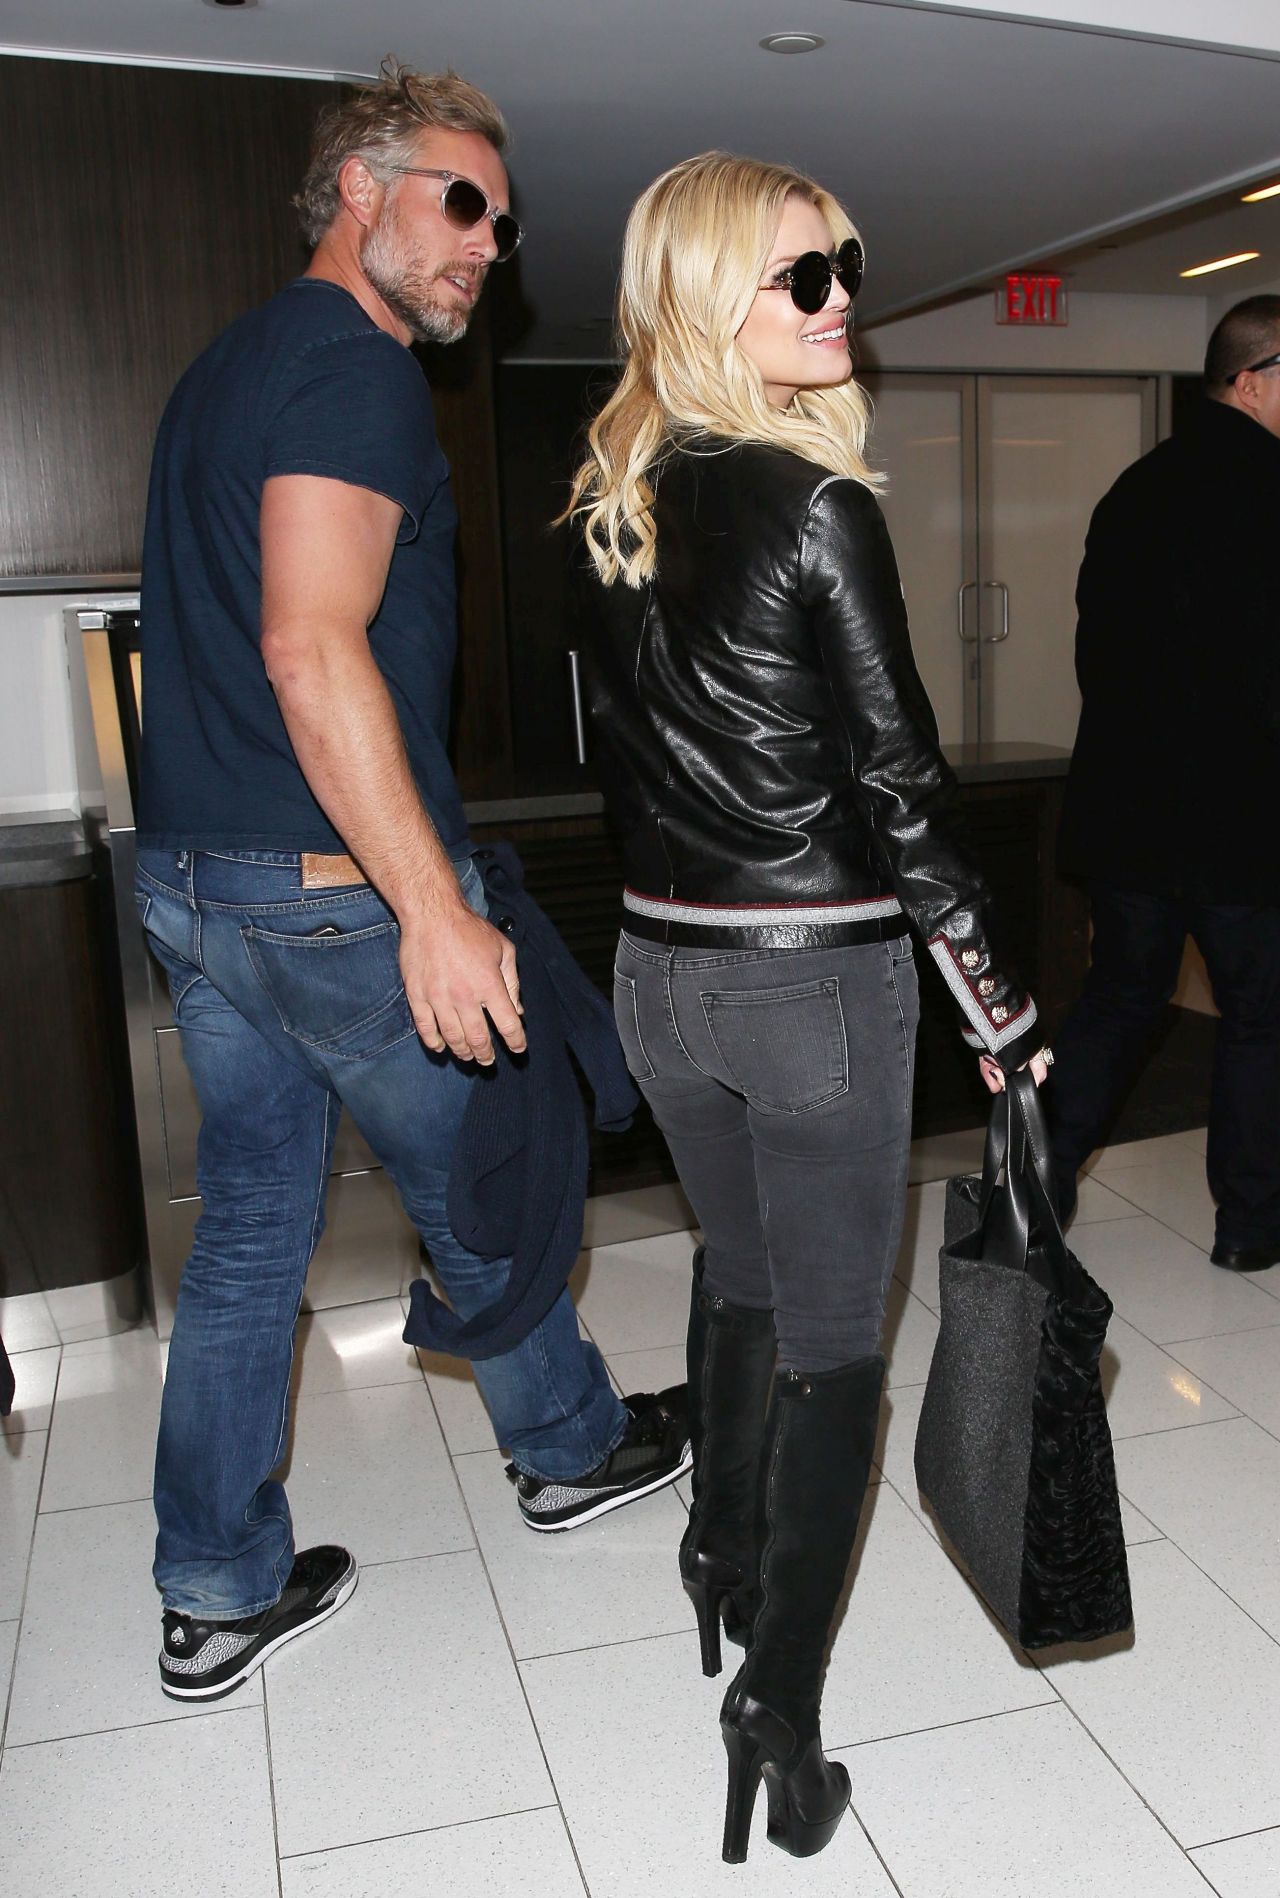 Jessica Simpson Booty in Jeans - at LAX Airport in Los ...